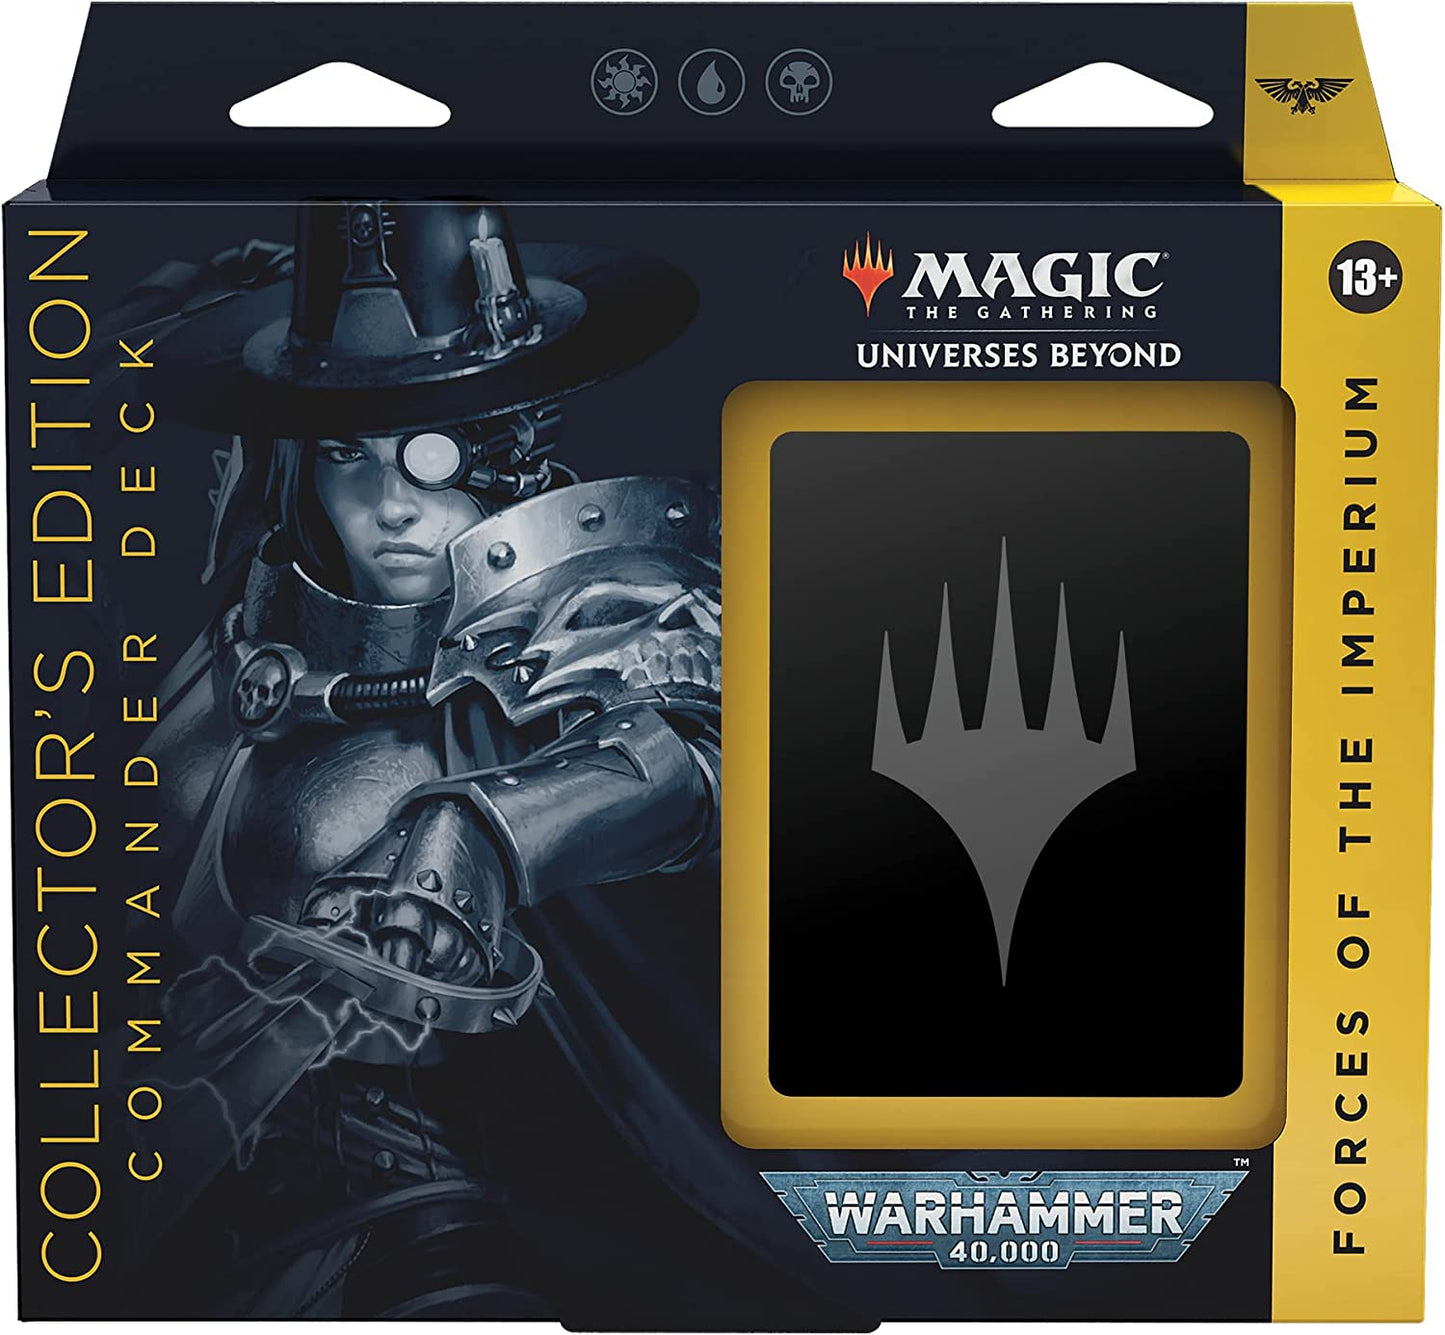 Magic: The Gathering Commander Deck - Universes Beyond: Warhammer 40,000 (Foil Collector's Edition) - Forces of the Imperium